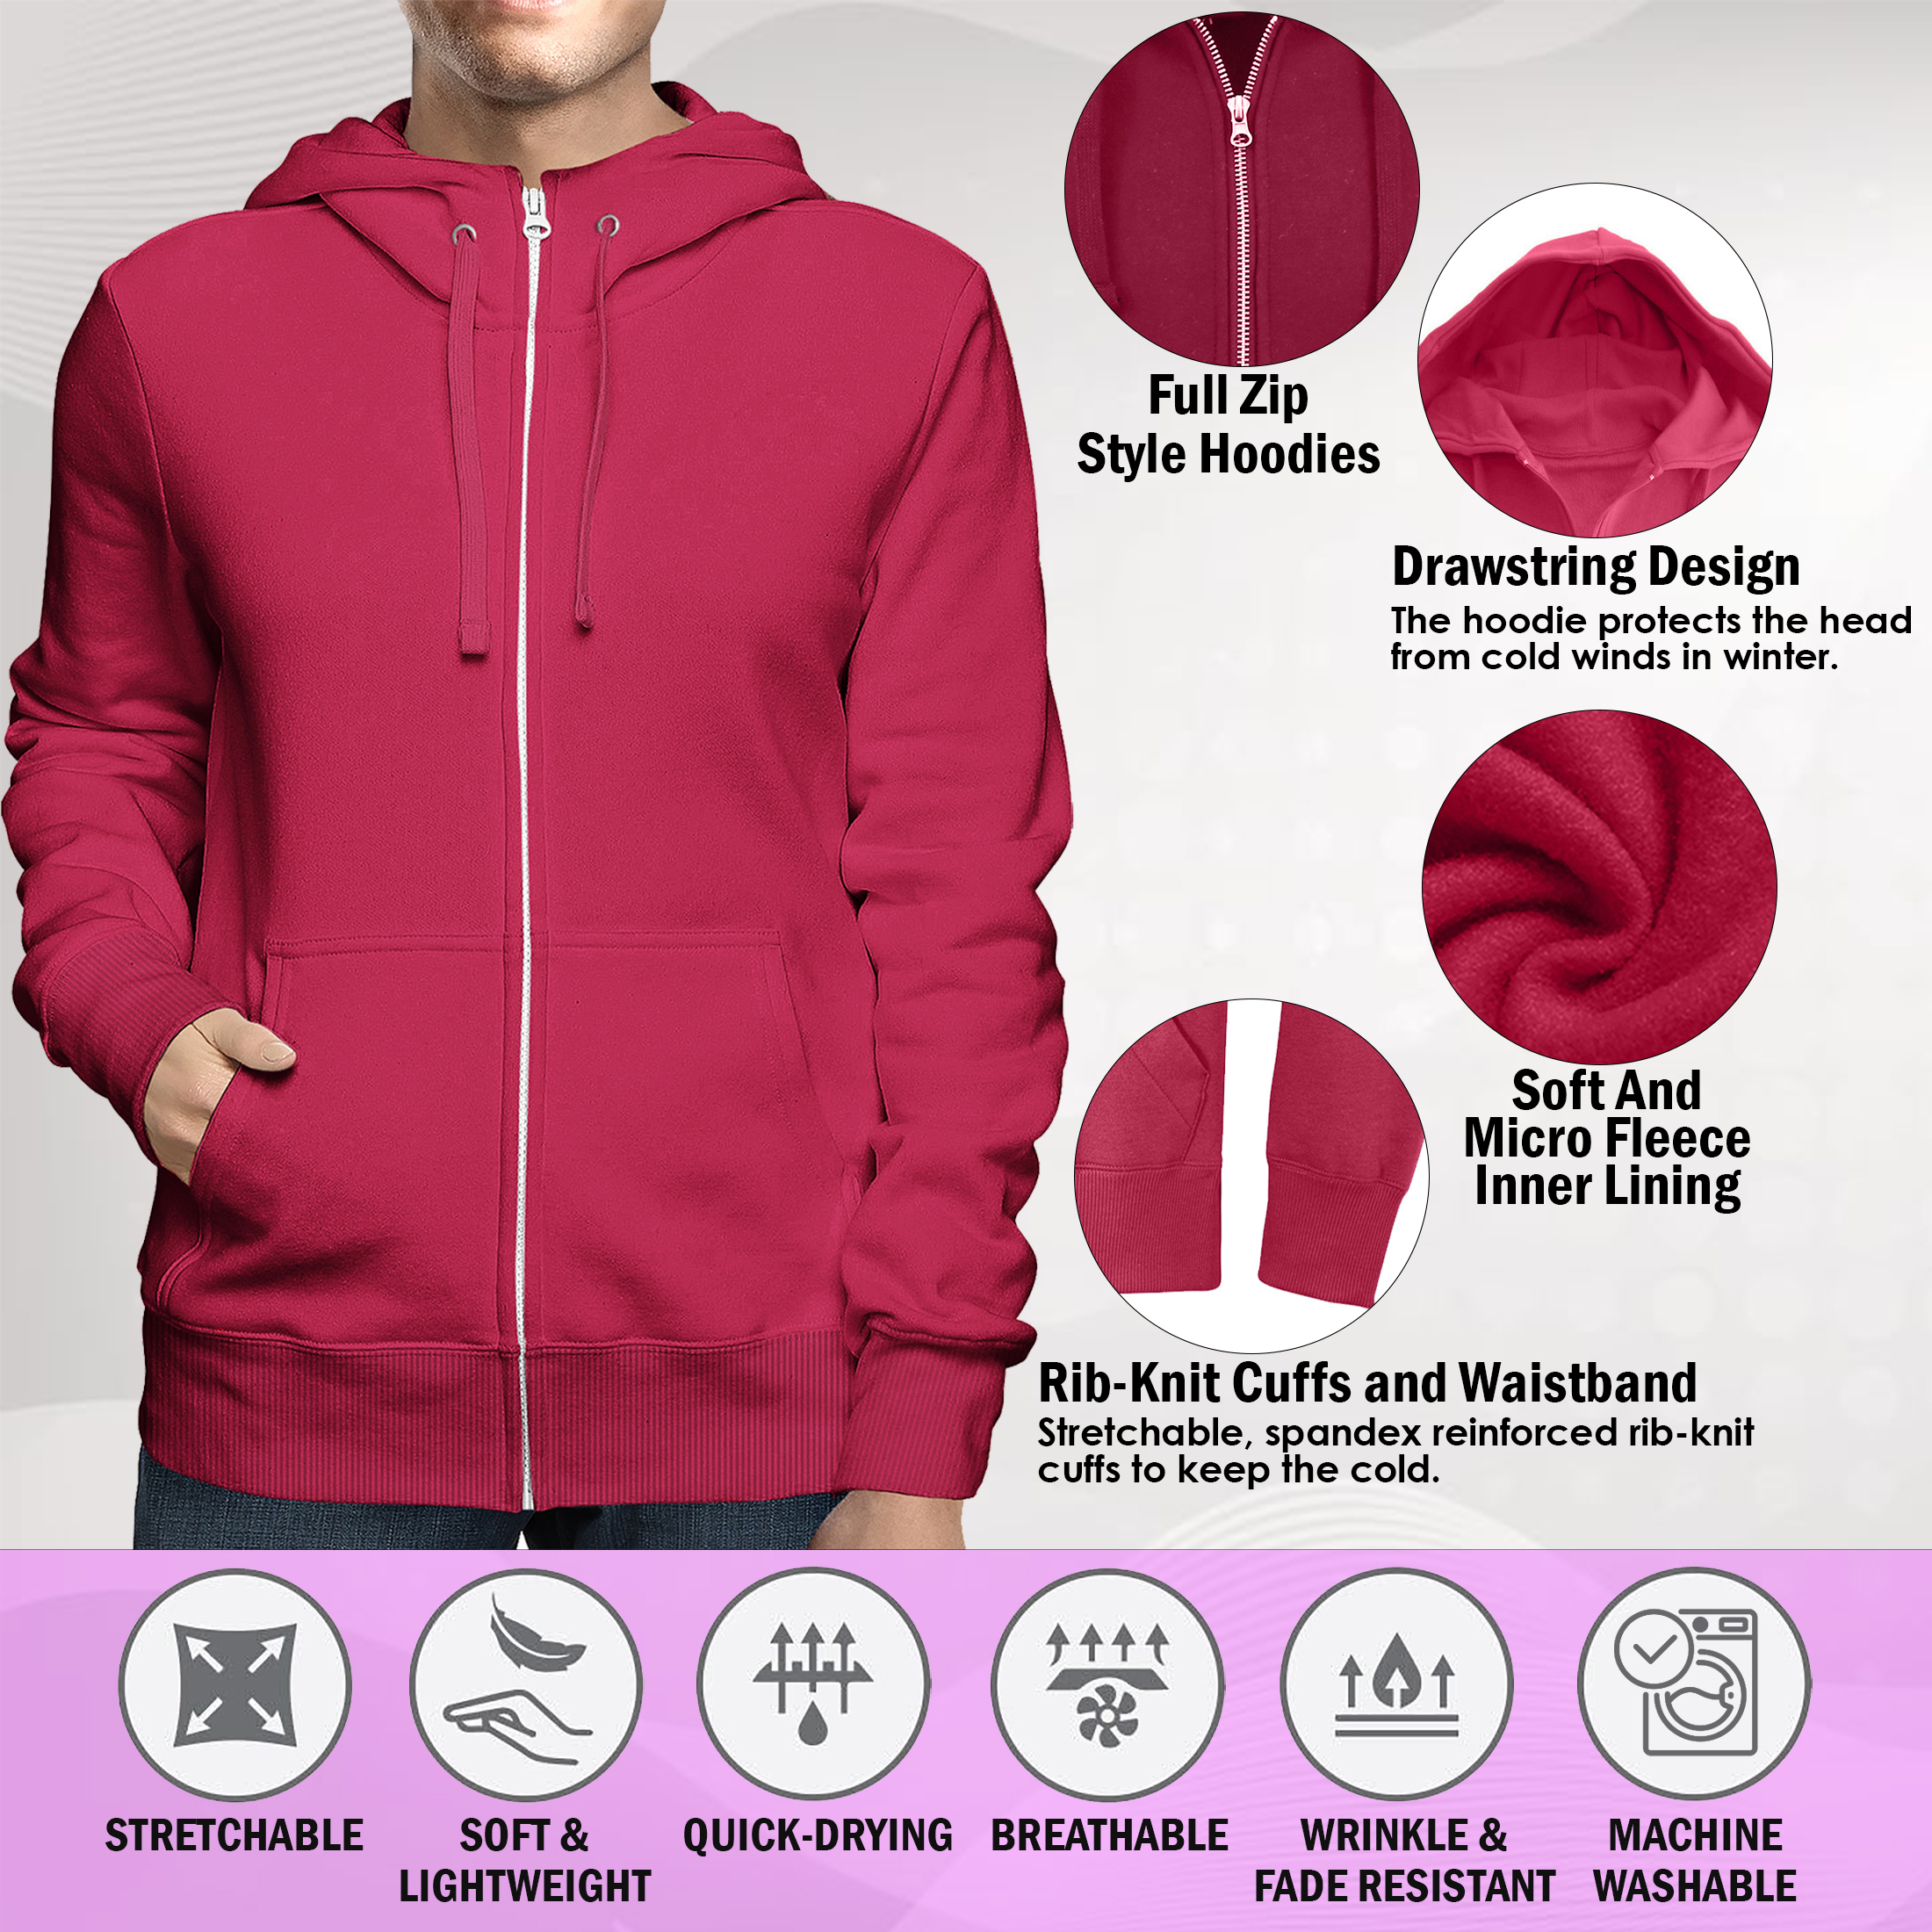 2-Pack: Men's Full Zip Up Fleece-Lined Hoodie Sweatshirt (Big & Tall Size Available) - Burgundy, Small